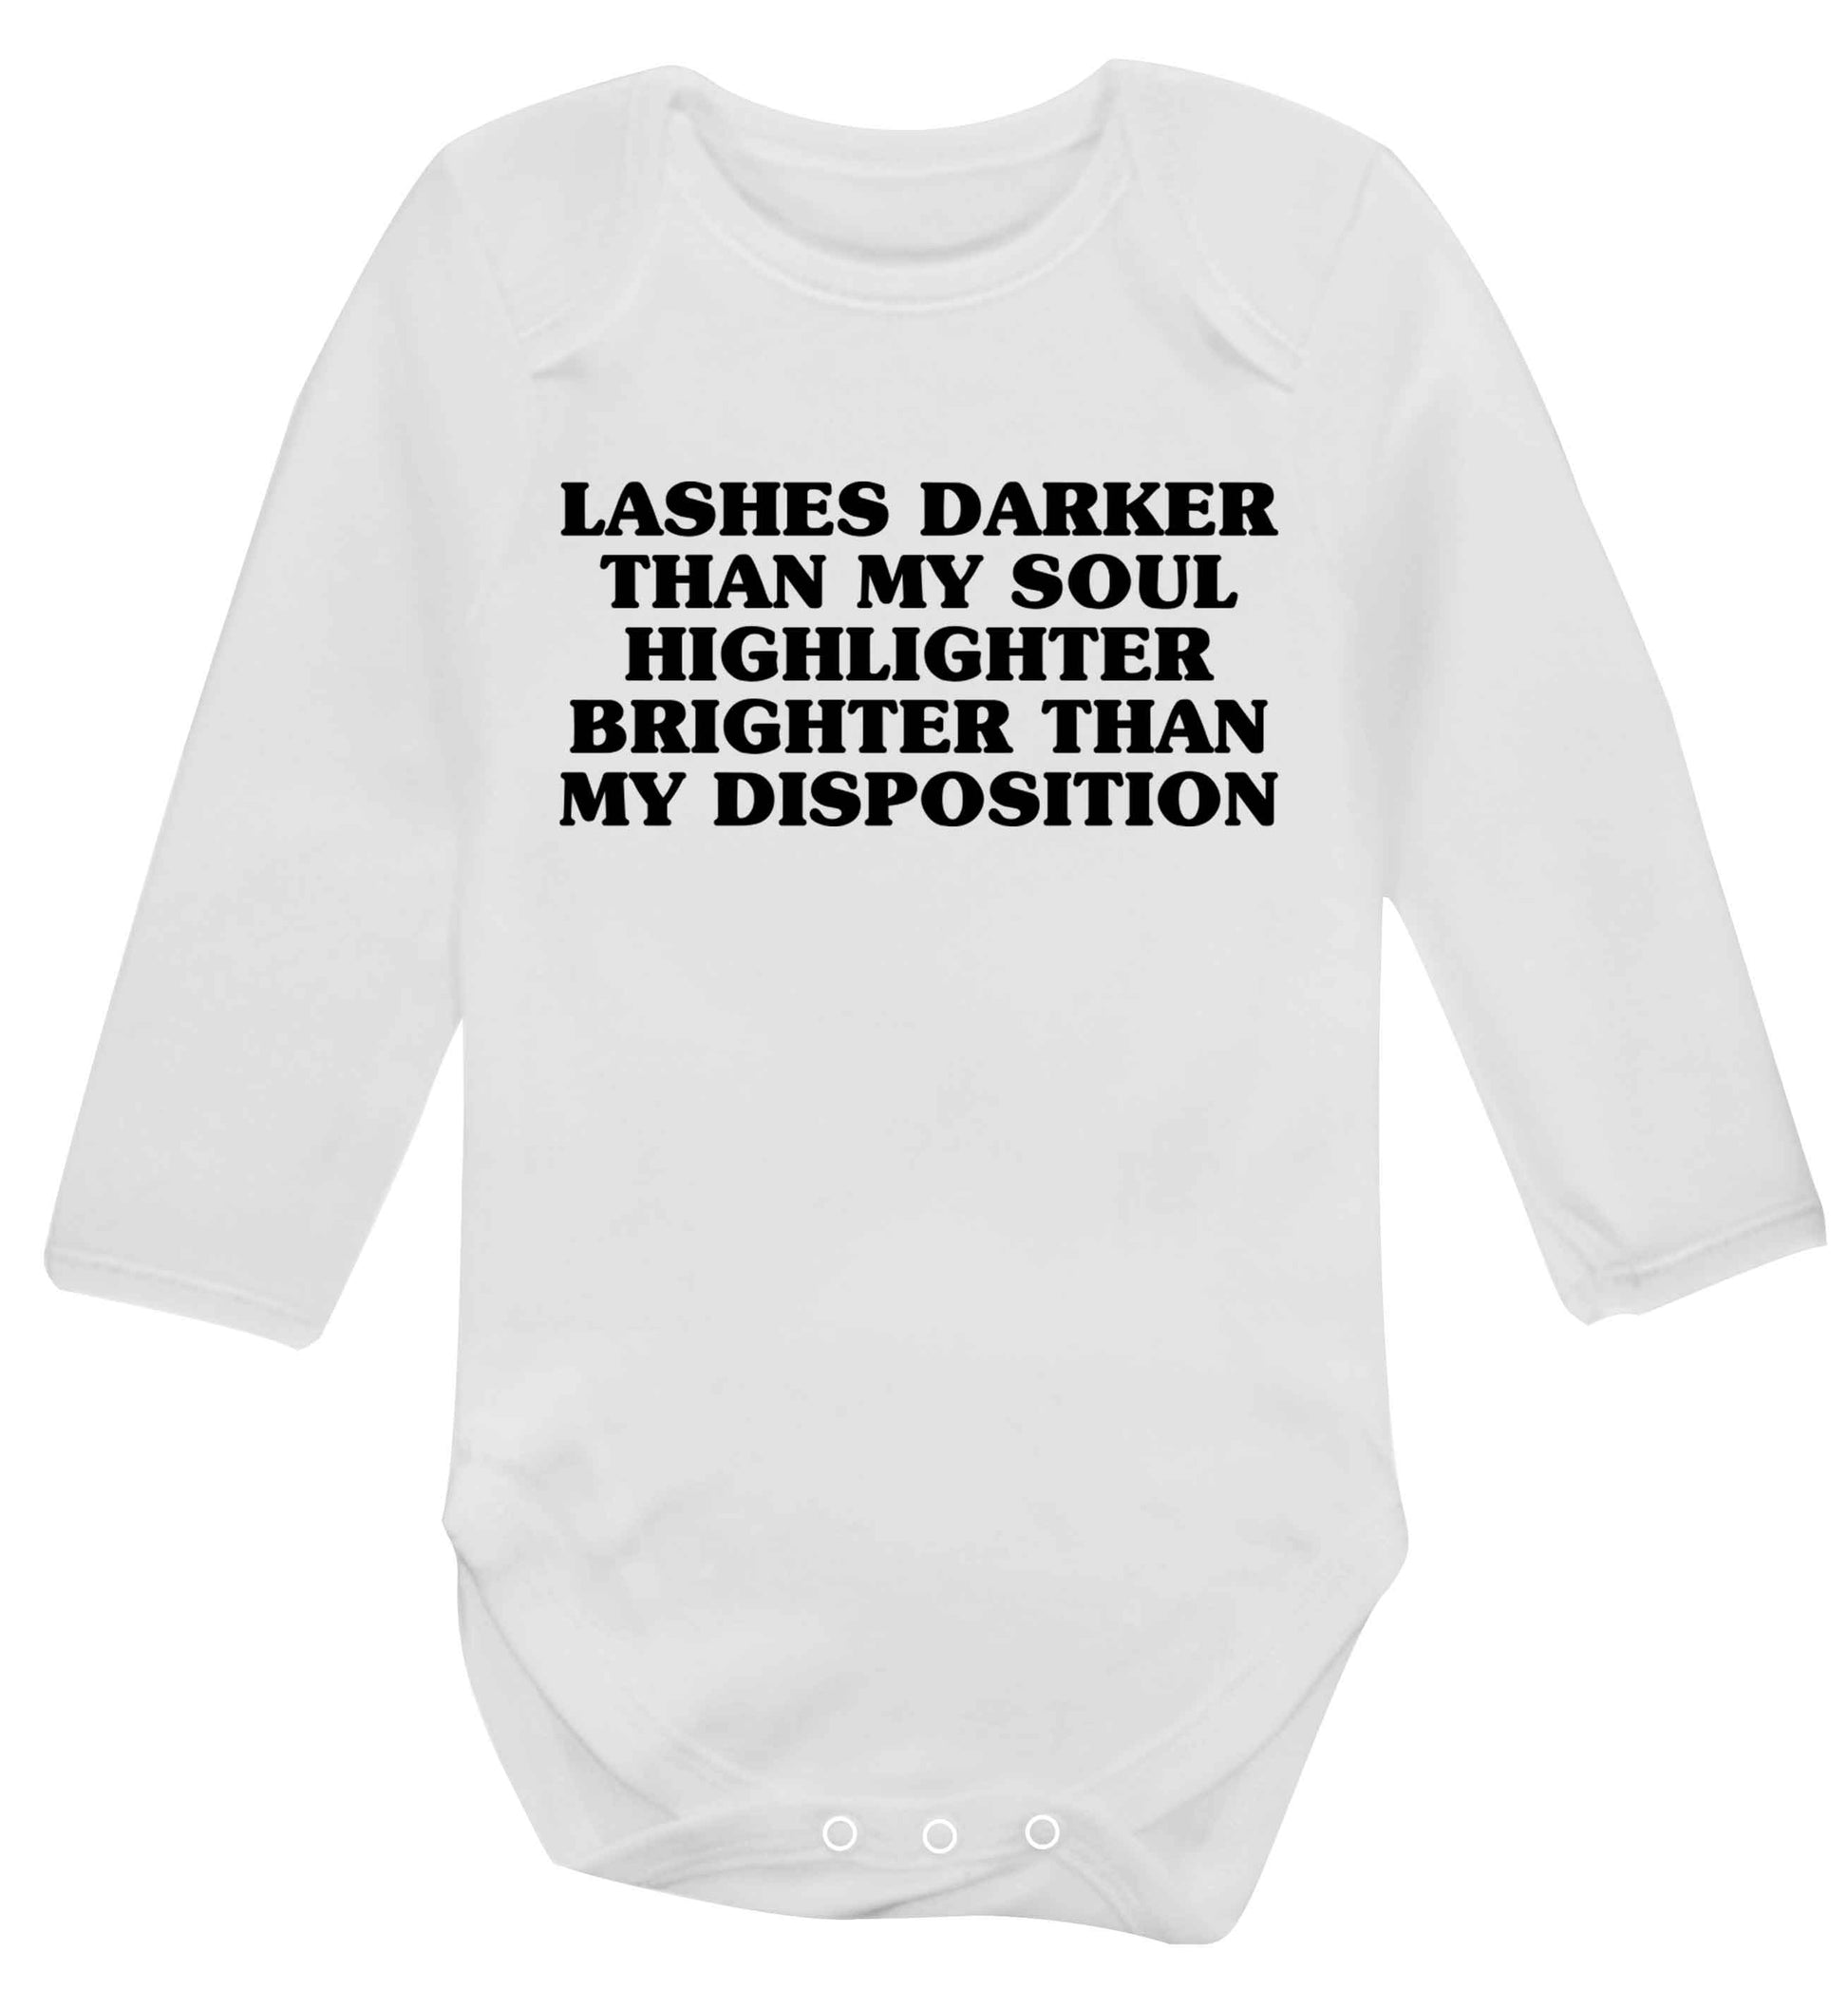 Lashes darker than my soul, highlighter brighter than my disposition Baby Vest long sleeved white 6-12 months